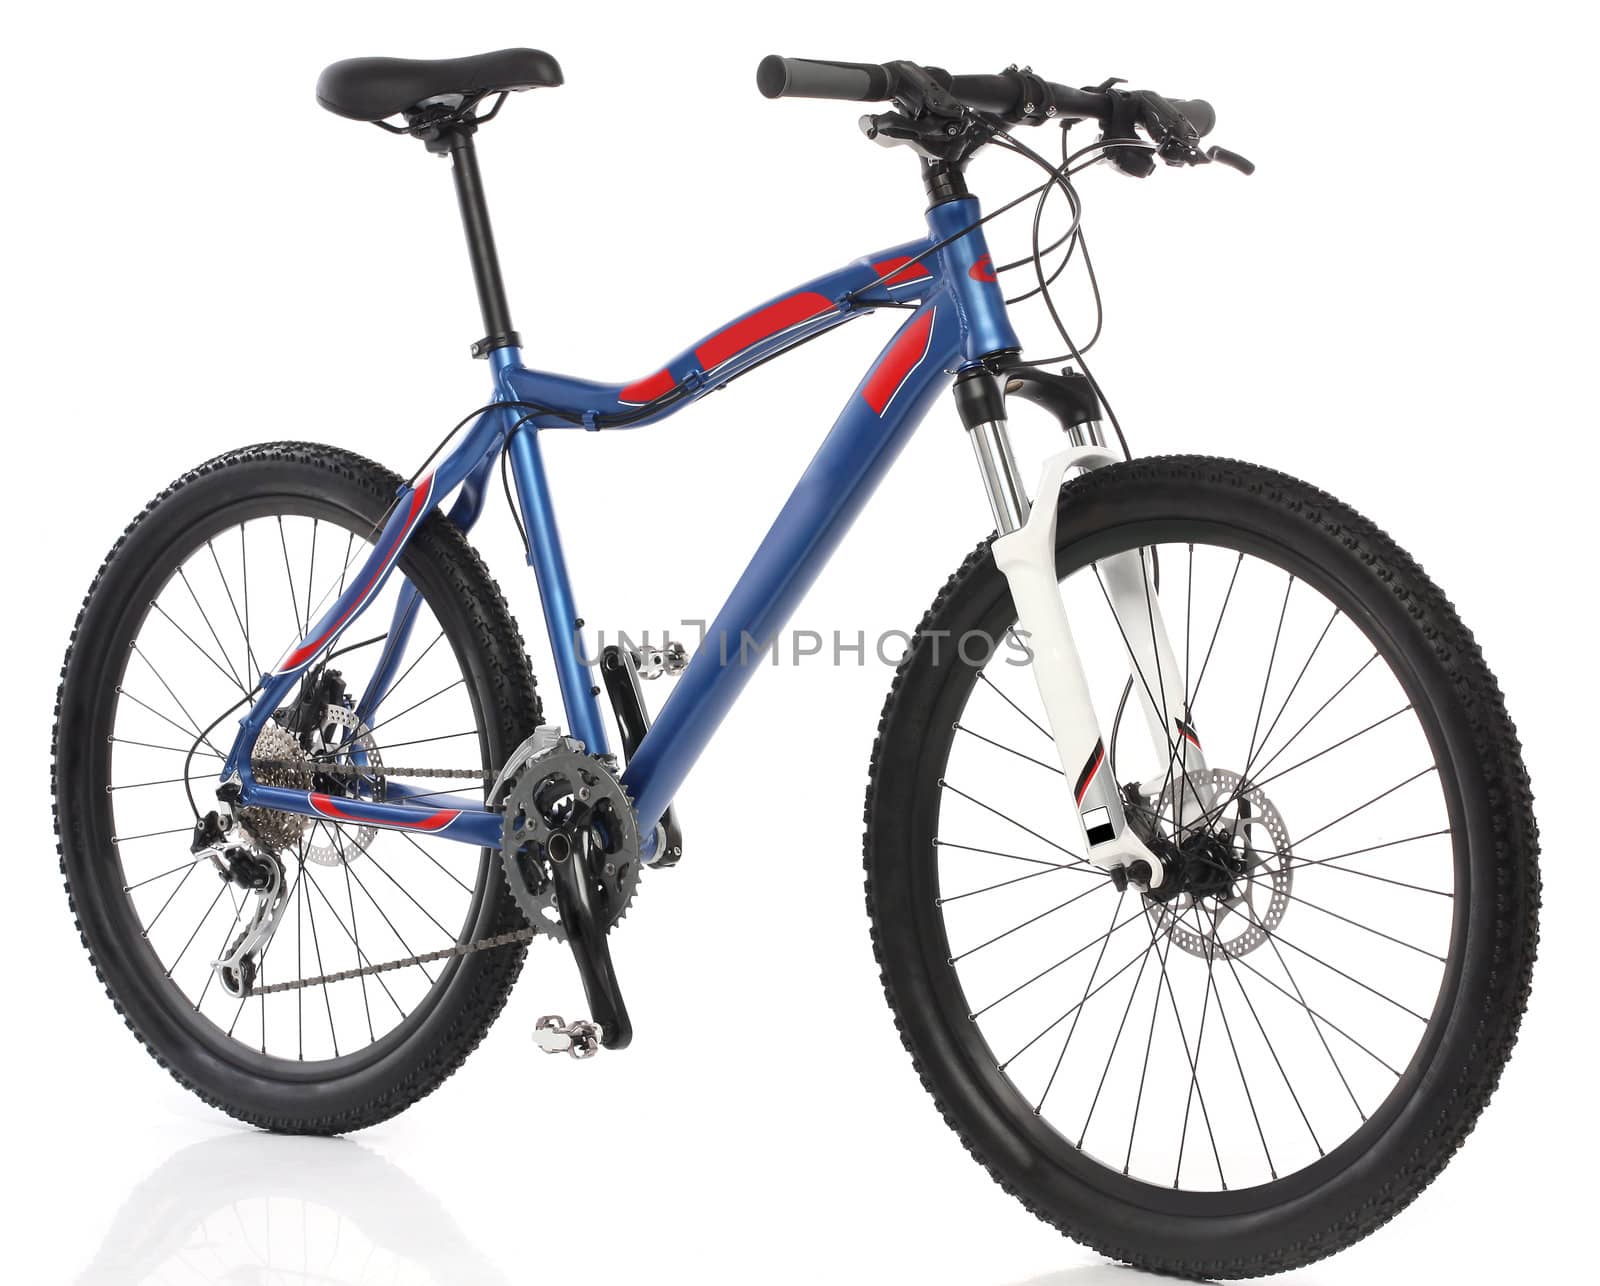 Mountain Bicycle over white background